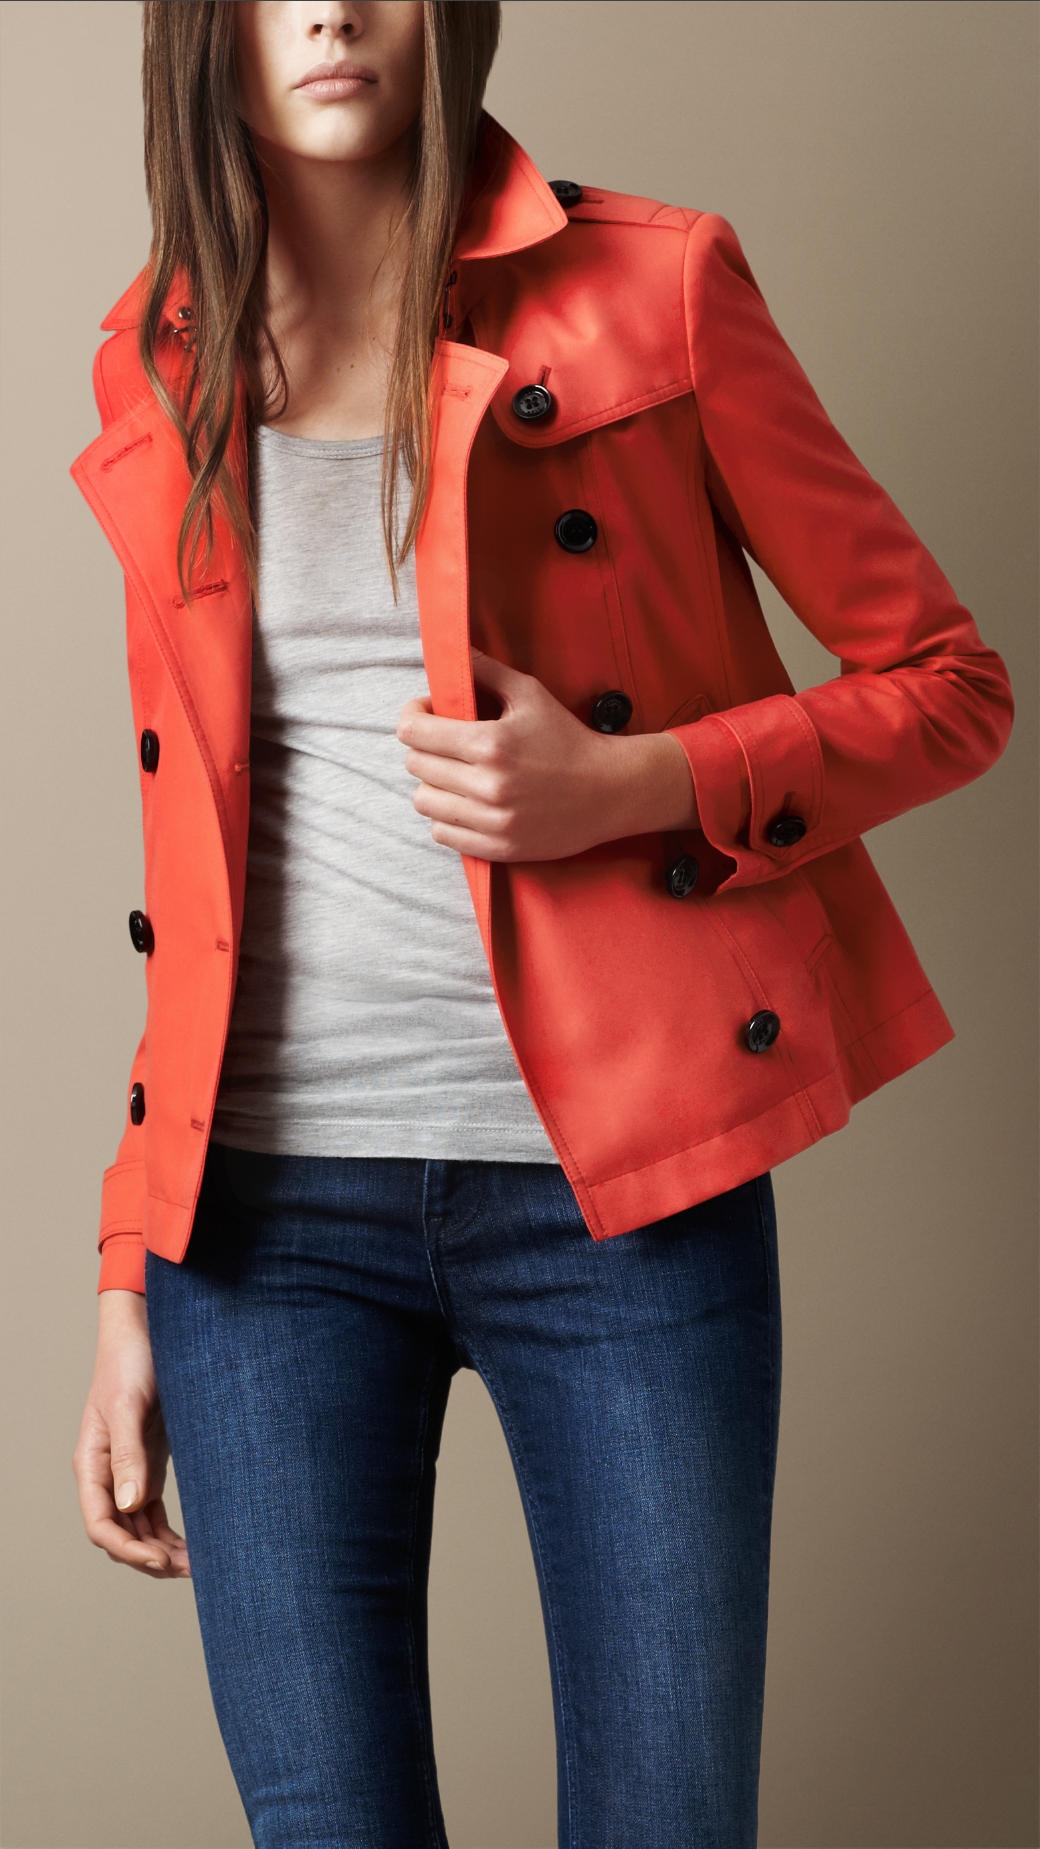 Burberry Brit Short Cotton Trench Coat in Orange Red (Red) - Lyst